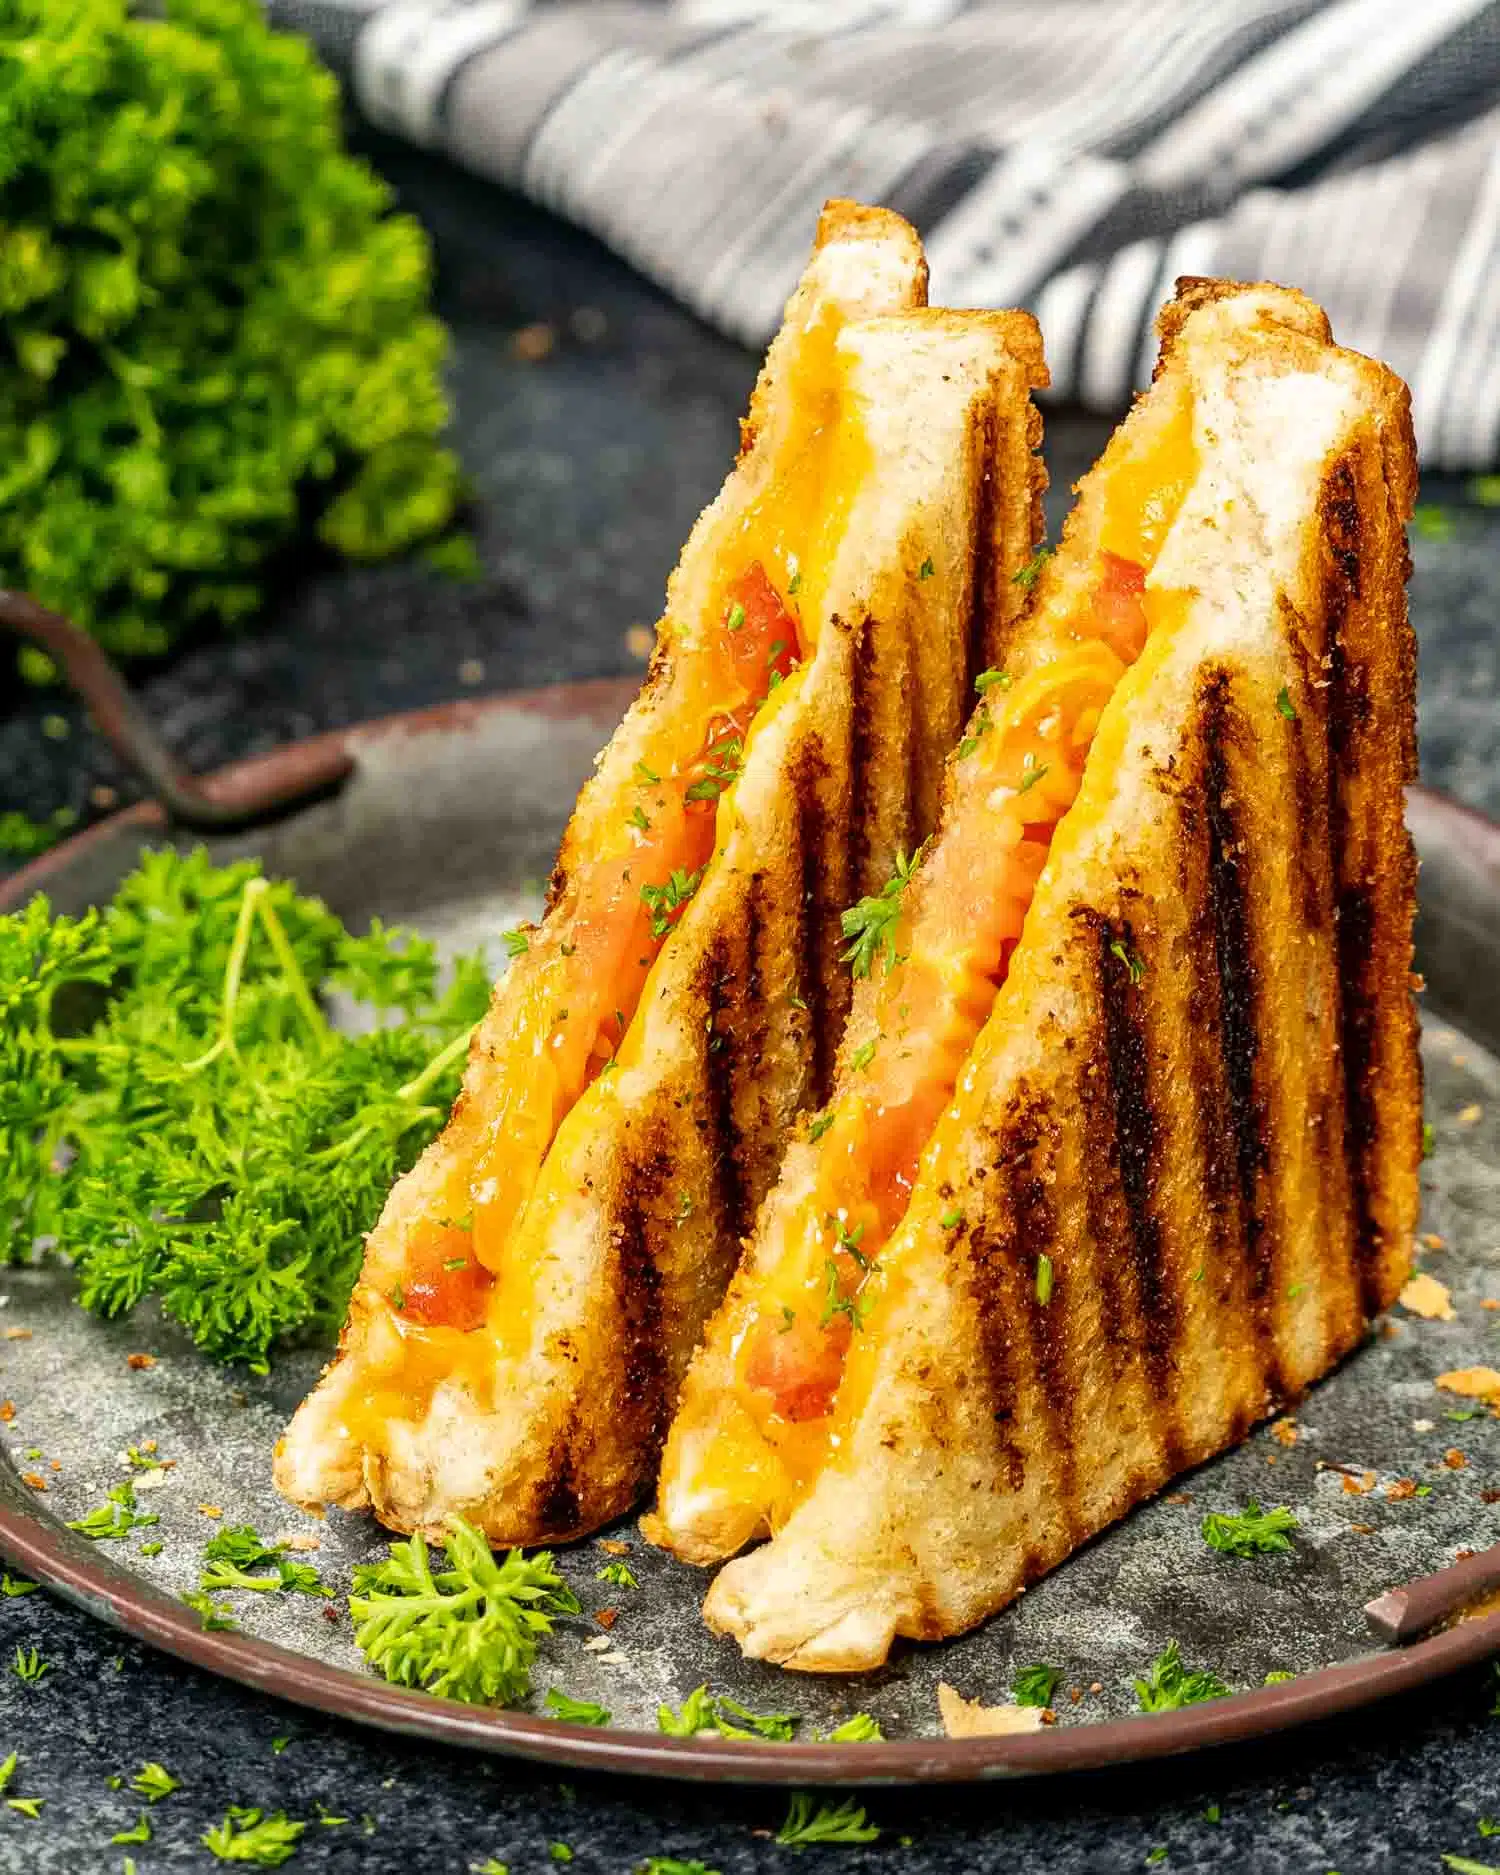 grilled cheese sandwich cut in half on a plate.